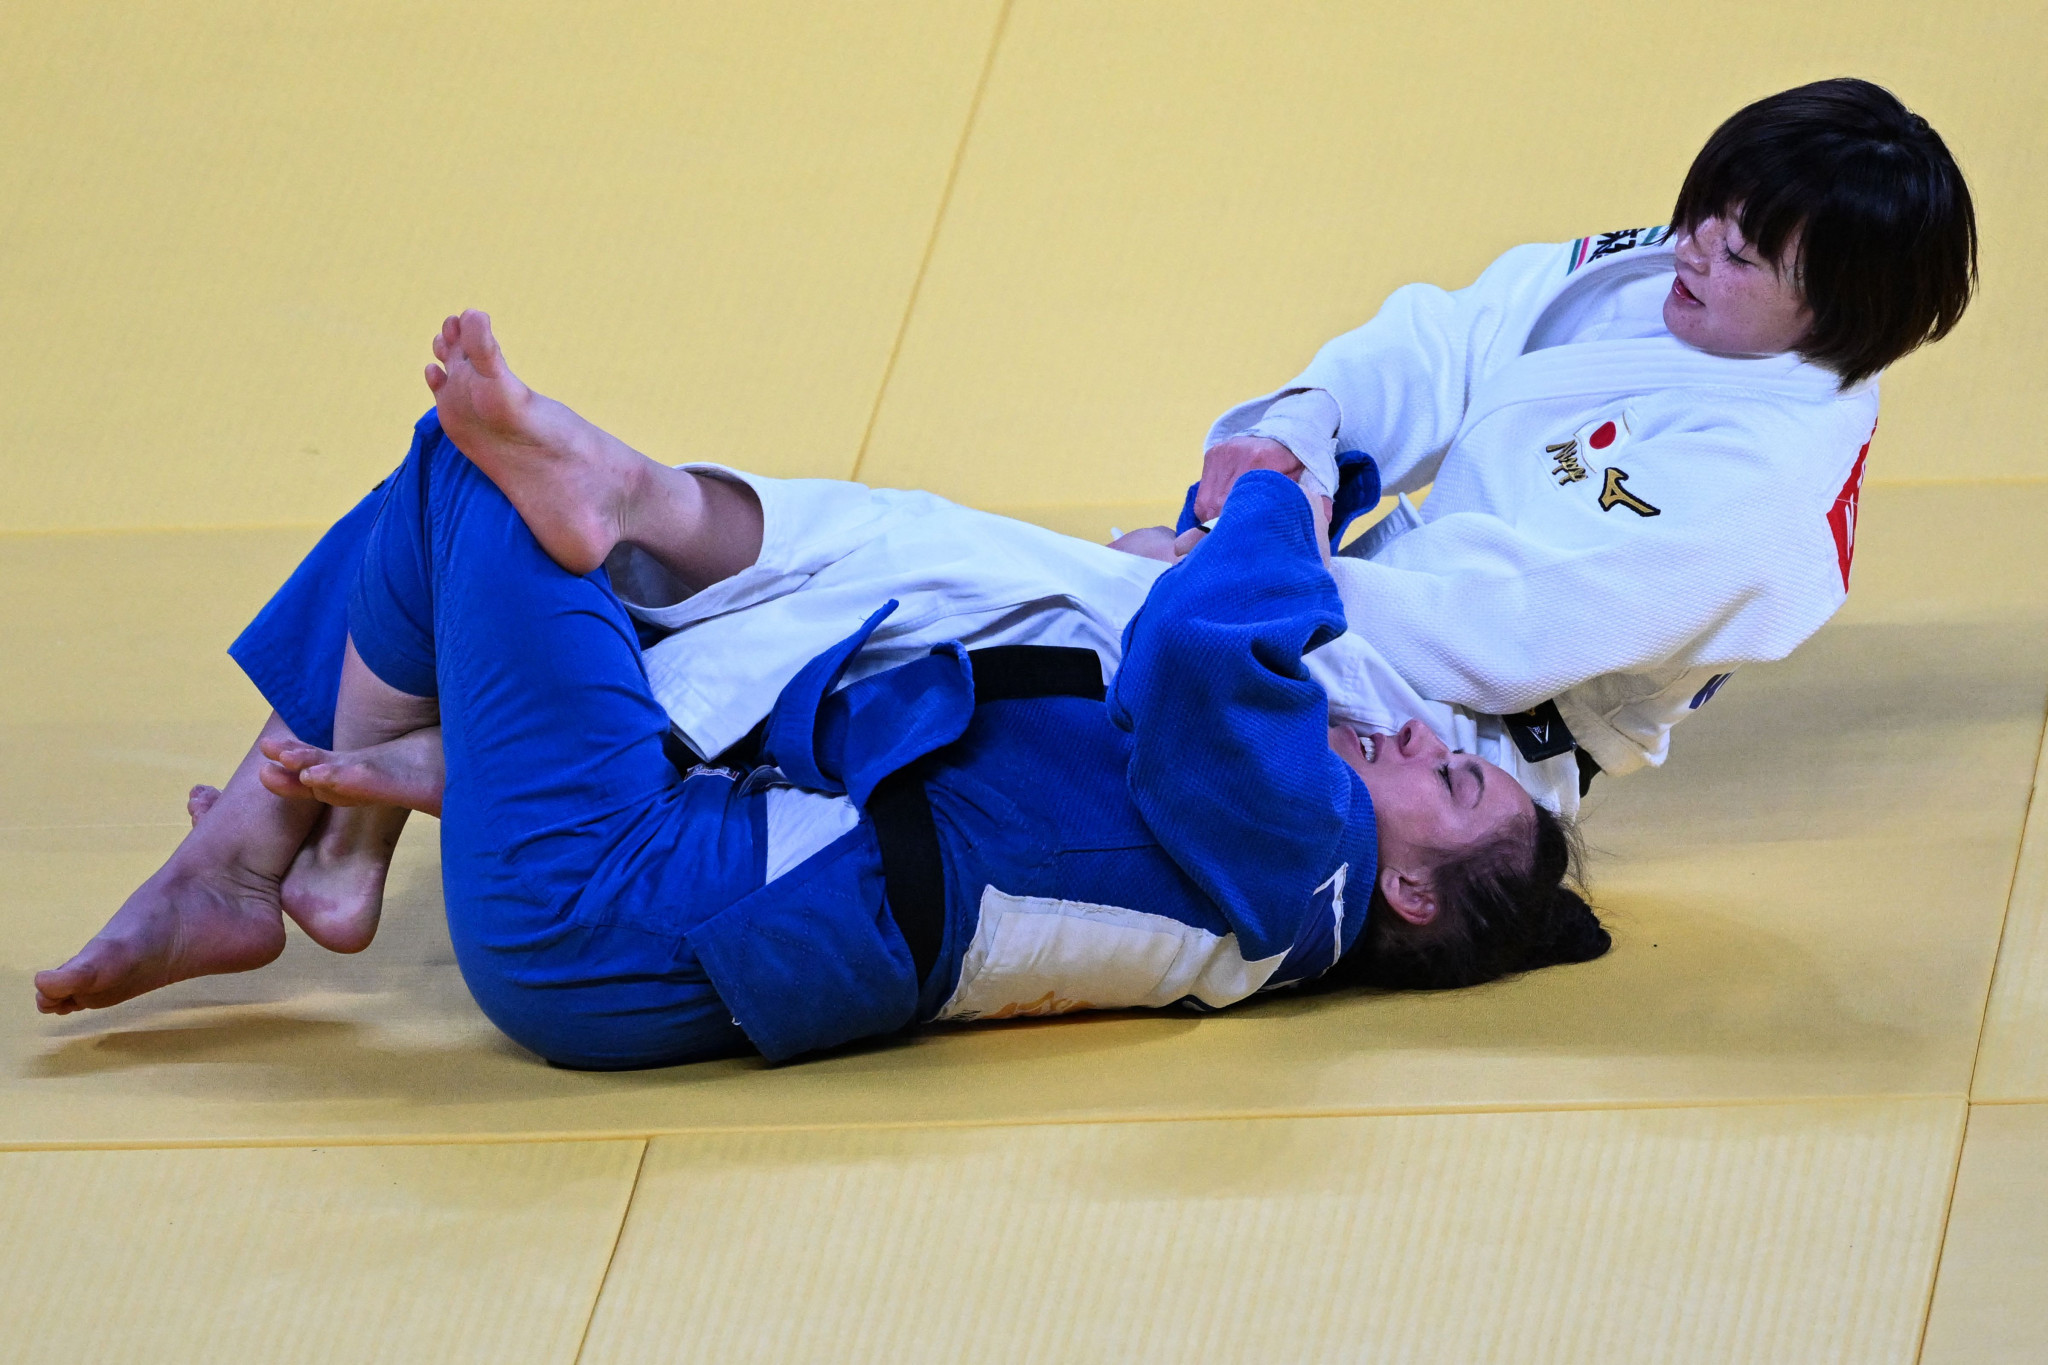 Natsumi Tsunoda, in white, beat Katharina Mentz to retain her title at the Judo World Championships ©Getty Images